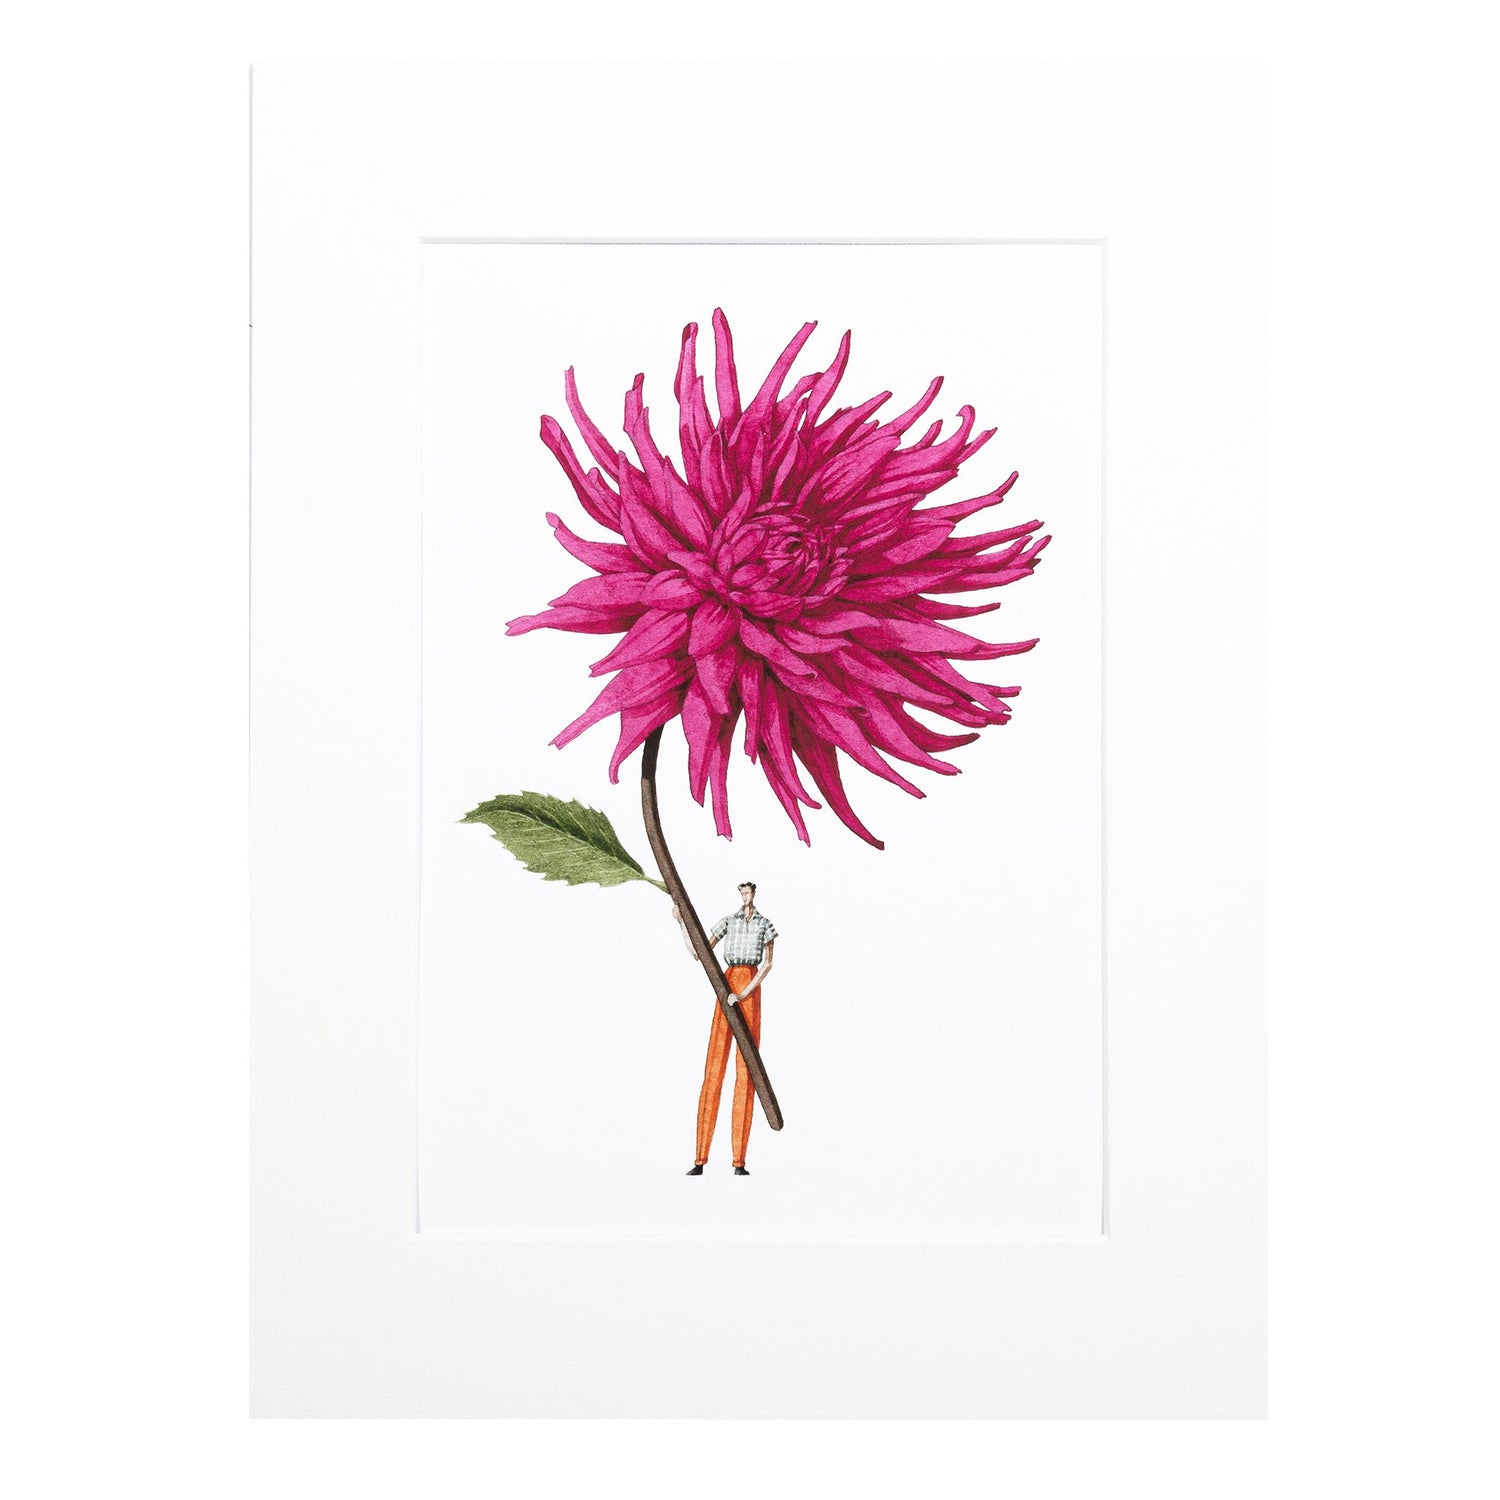 giclee print, mounted print, print, ammi, illustration, made in england, dahlias, archival paper, art print